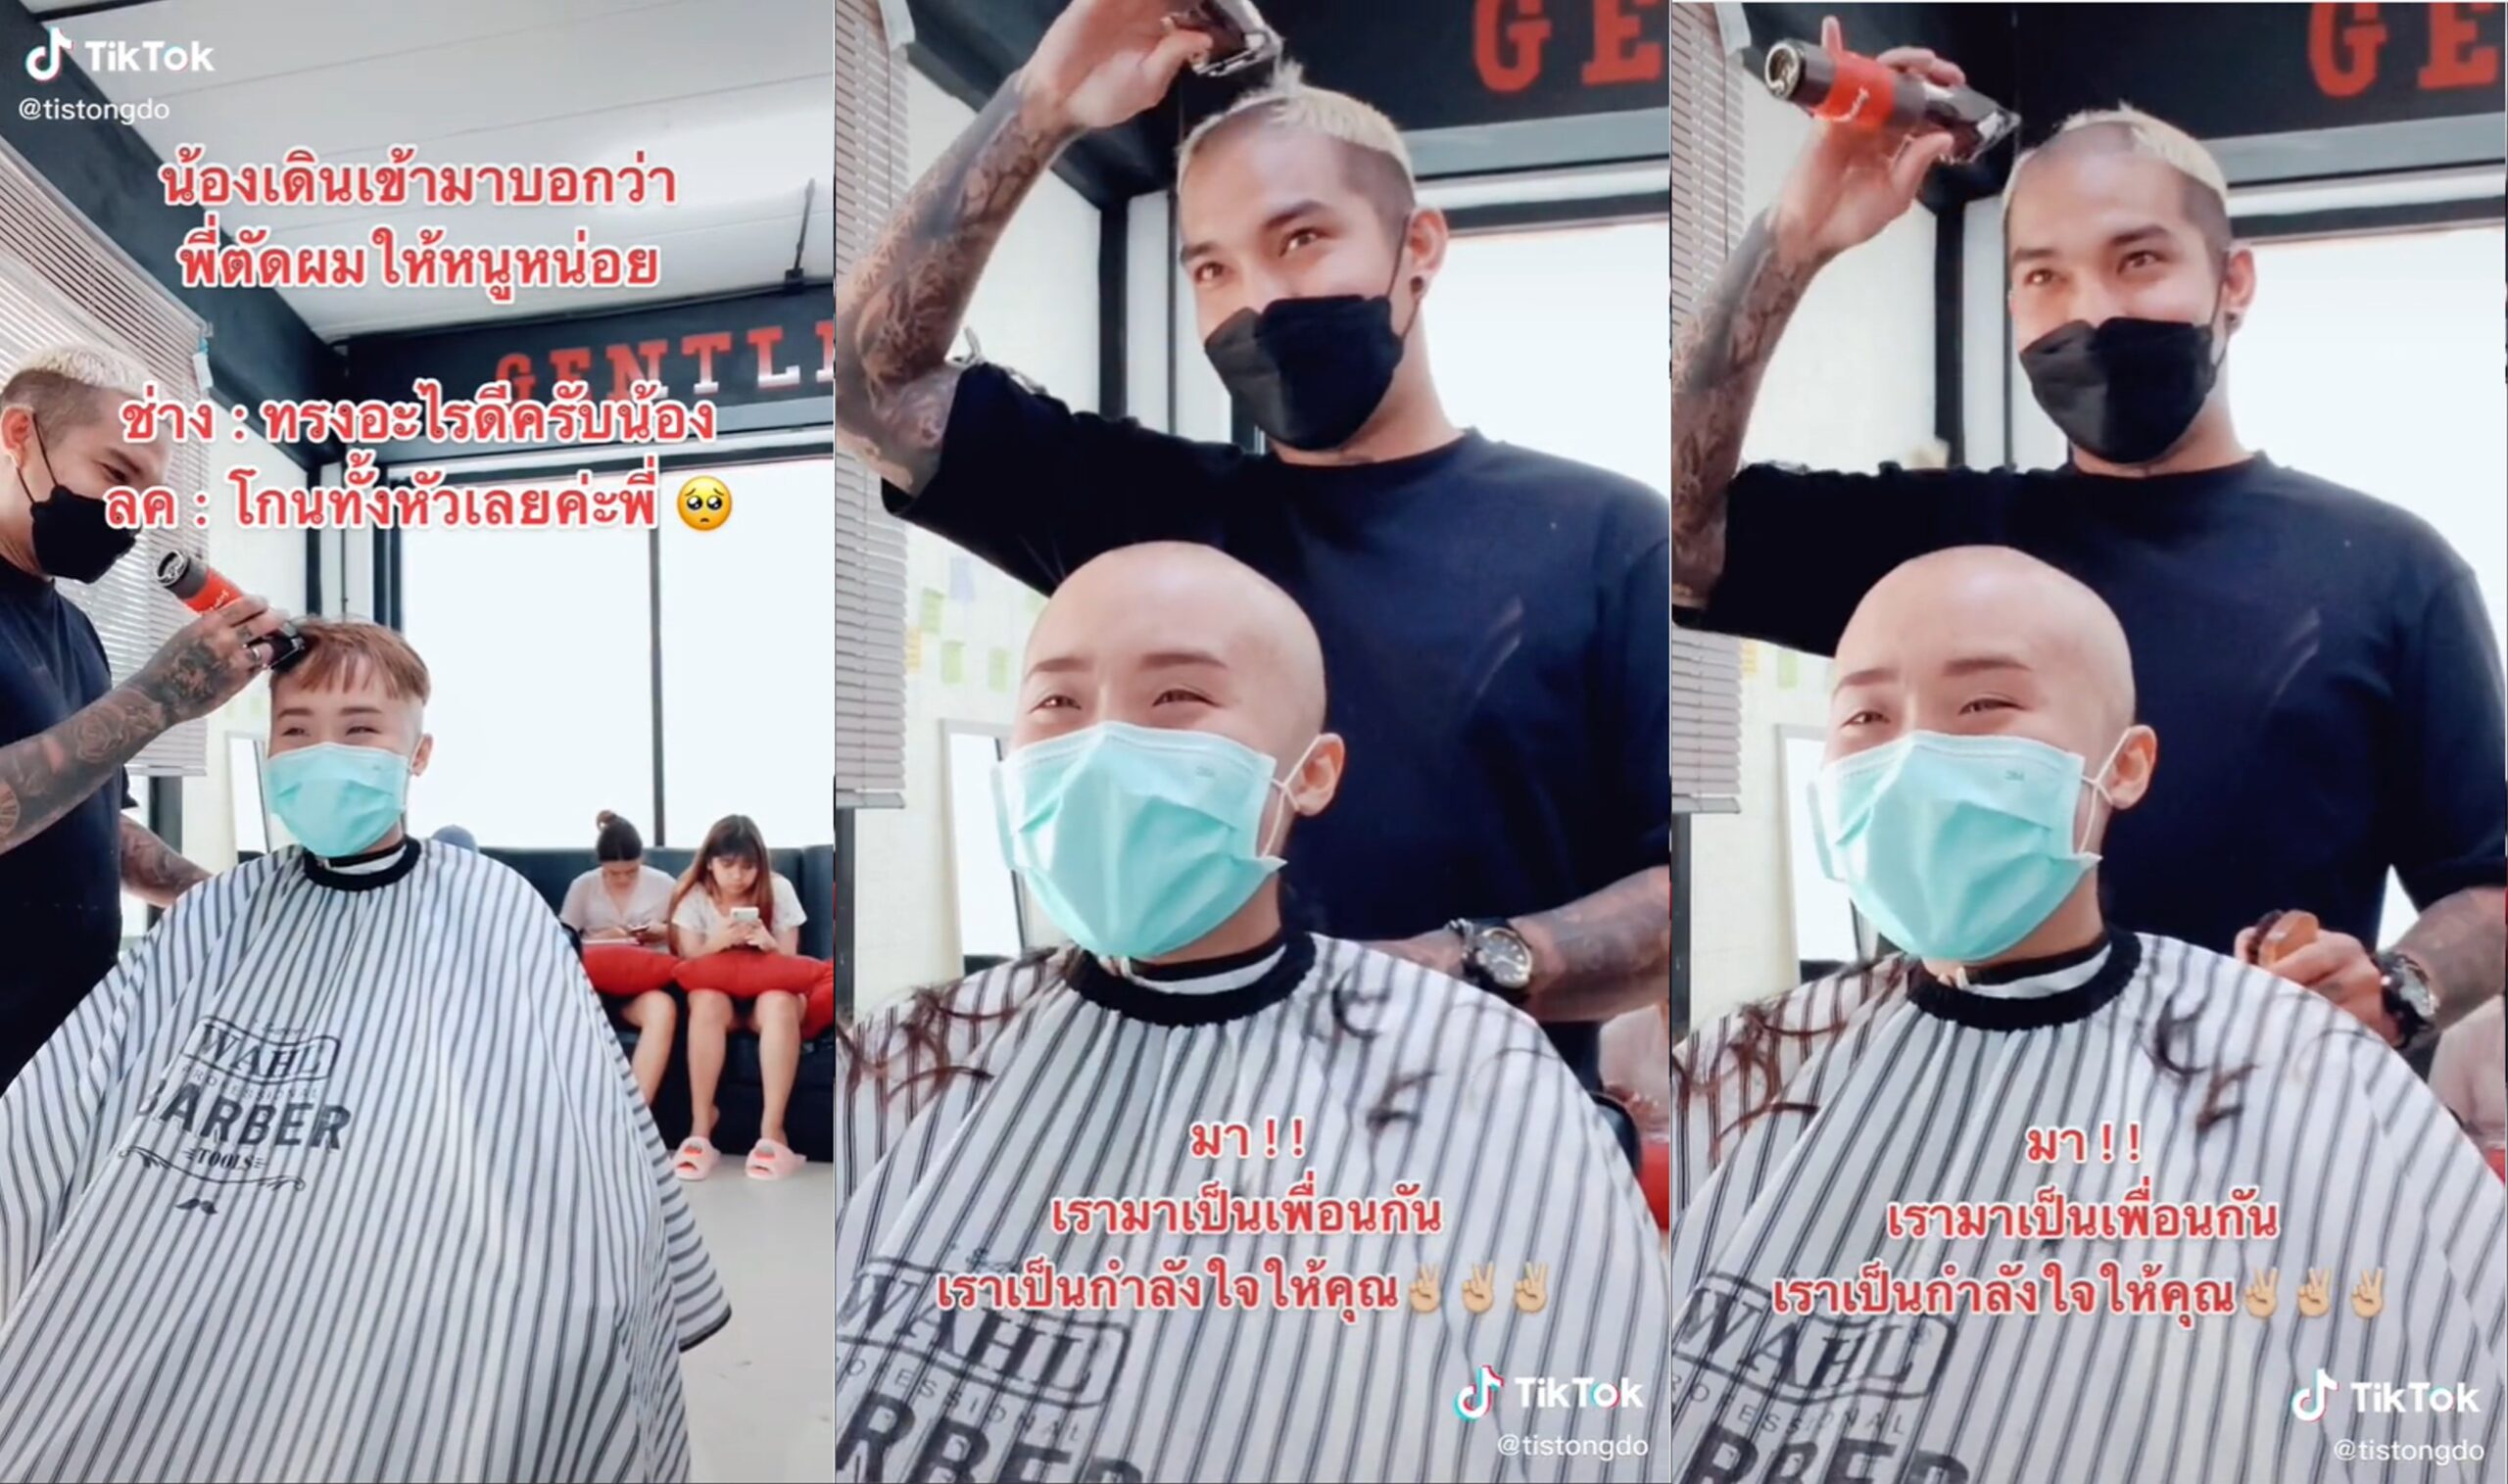 thai barber cancer patient solidarity